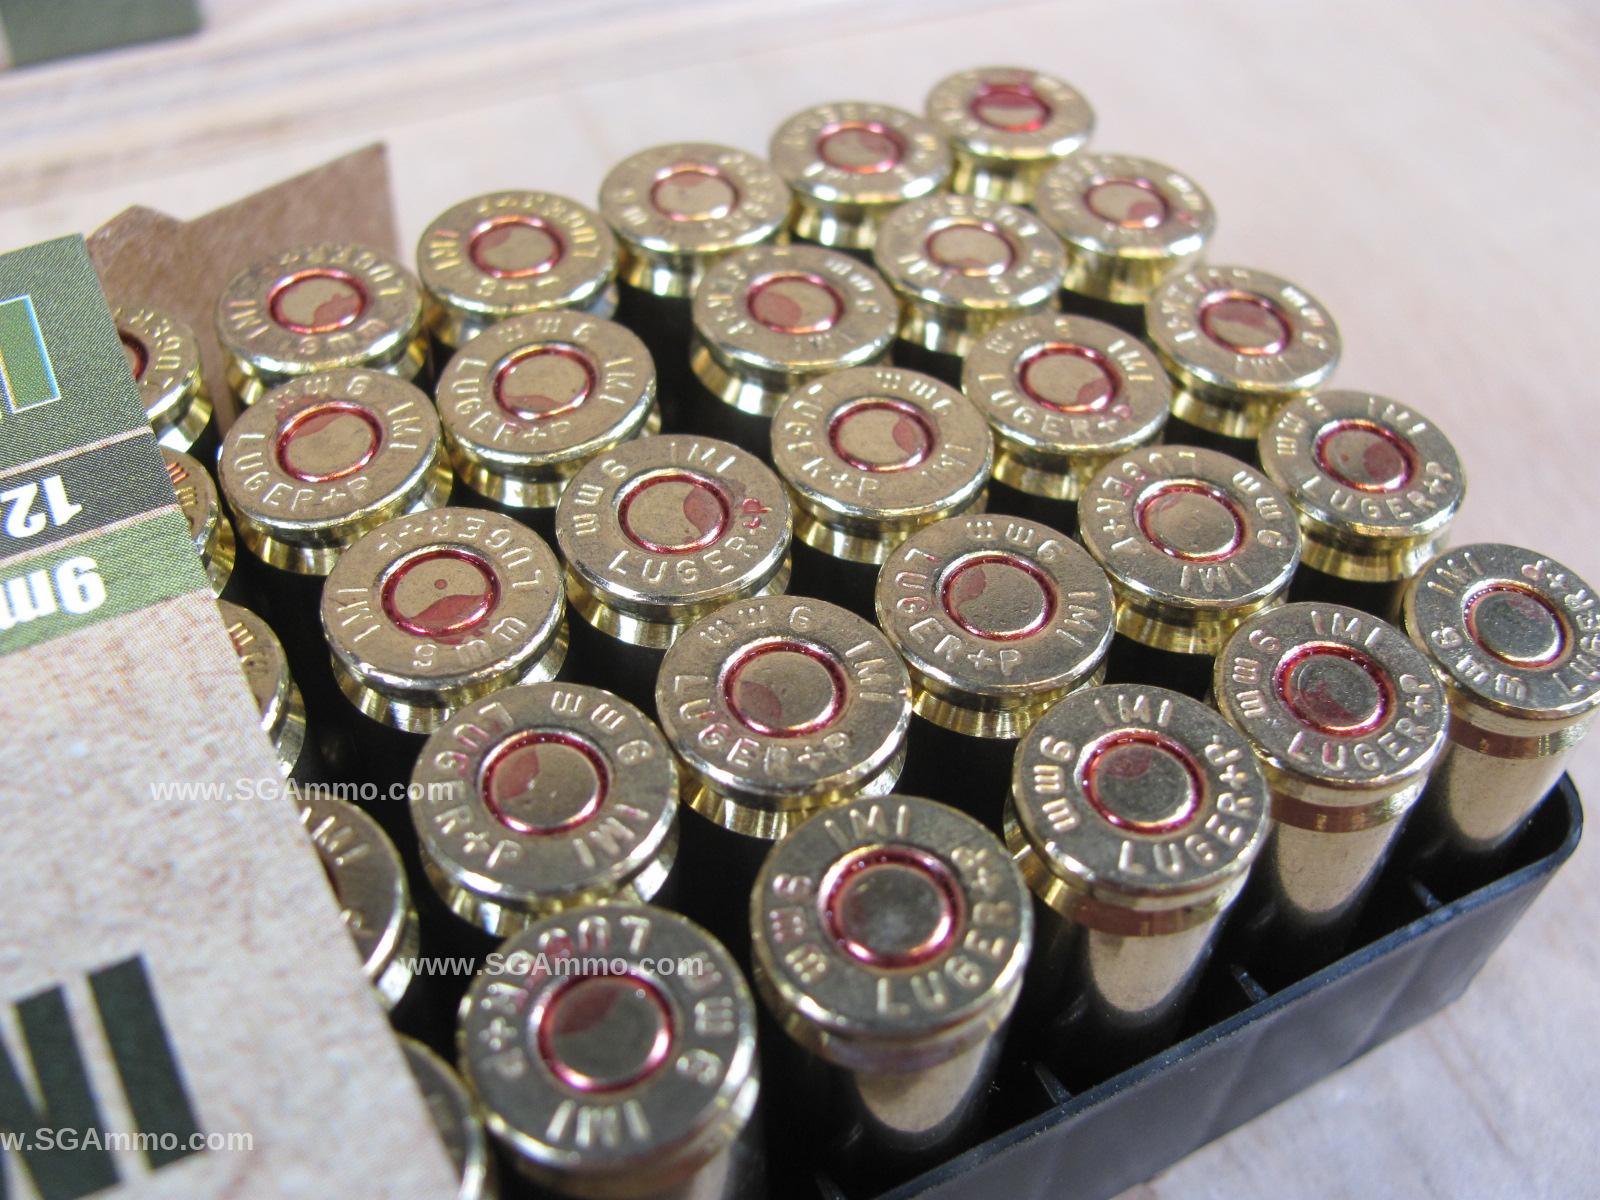 500 Round Plastic Can - 9mm Luger +P 124 Grain Di-Cut Jacketed Hollow Point Black Dot Ammo By IMI of Israel - Packed in Plastic Canister